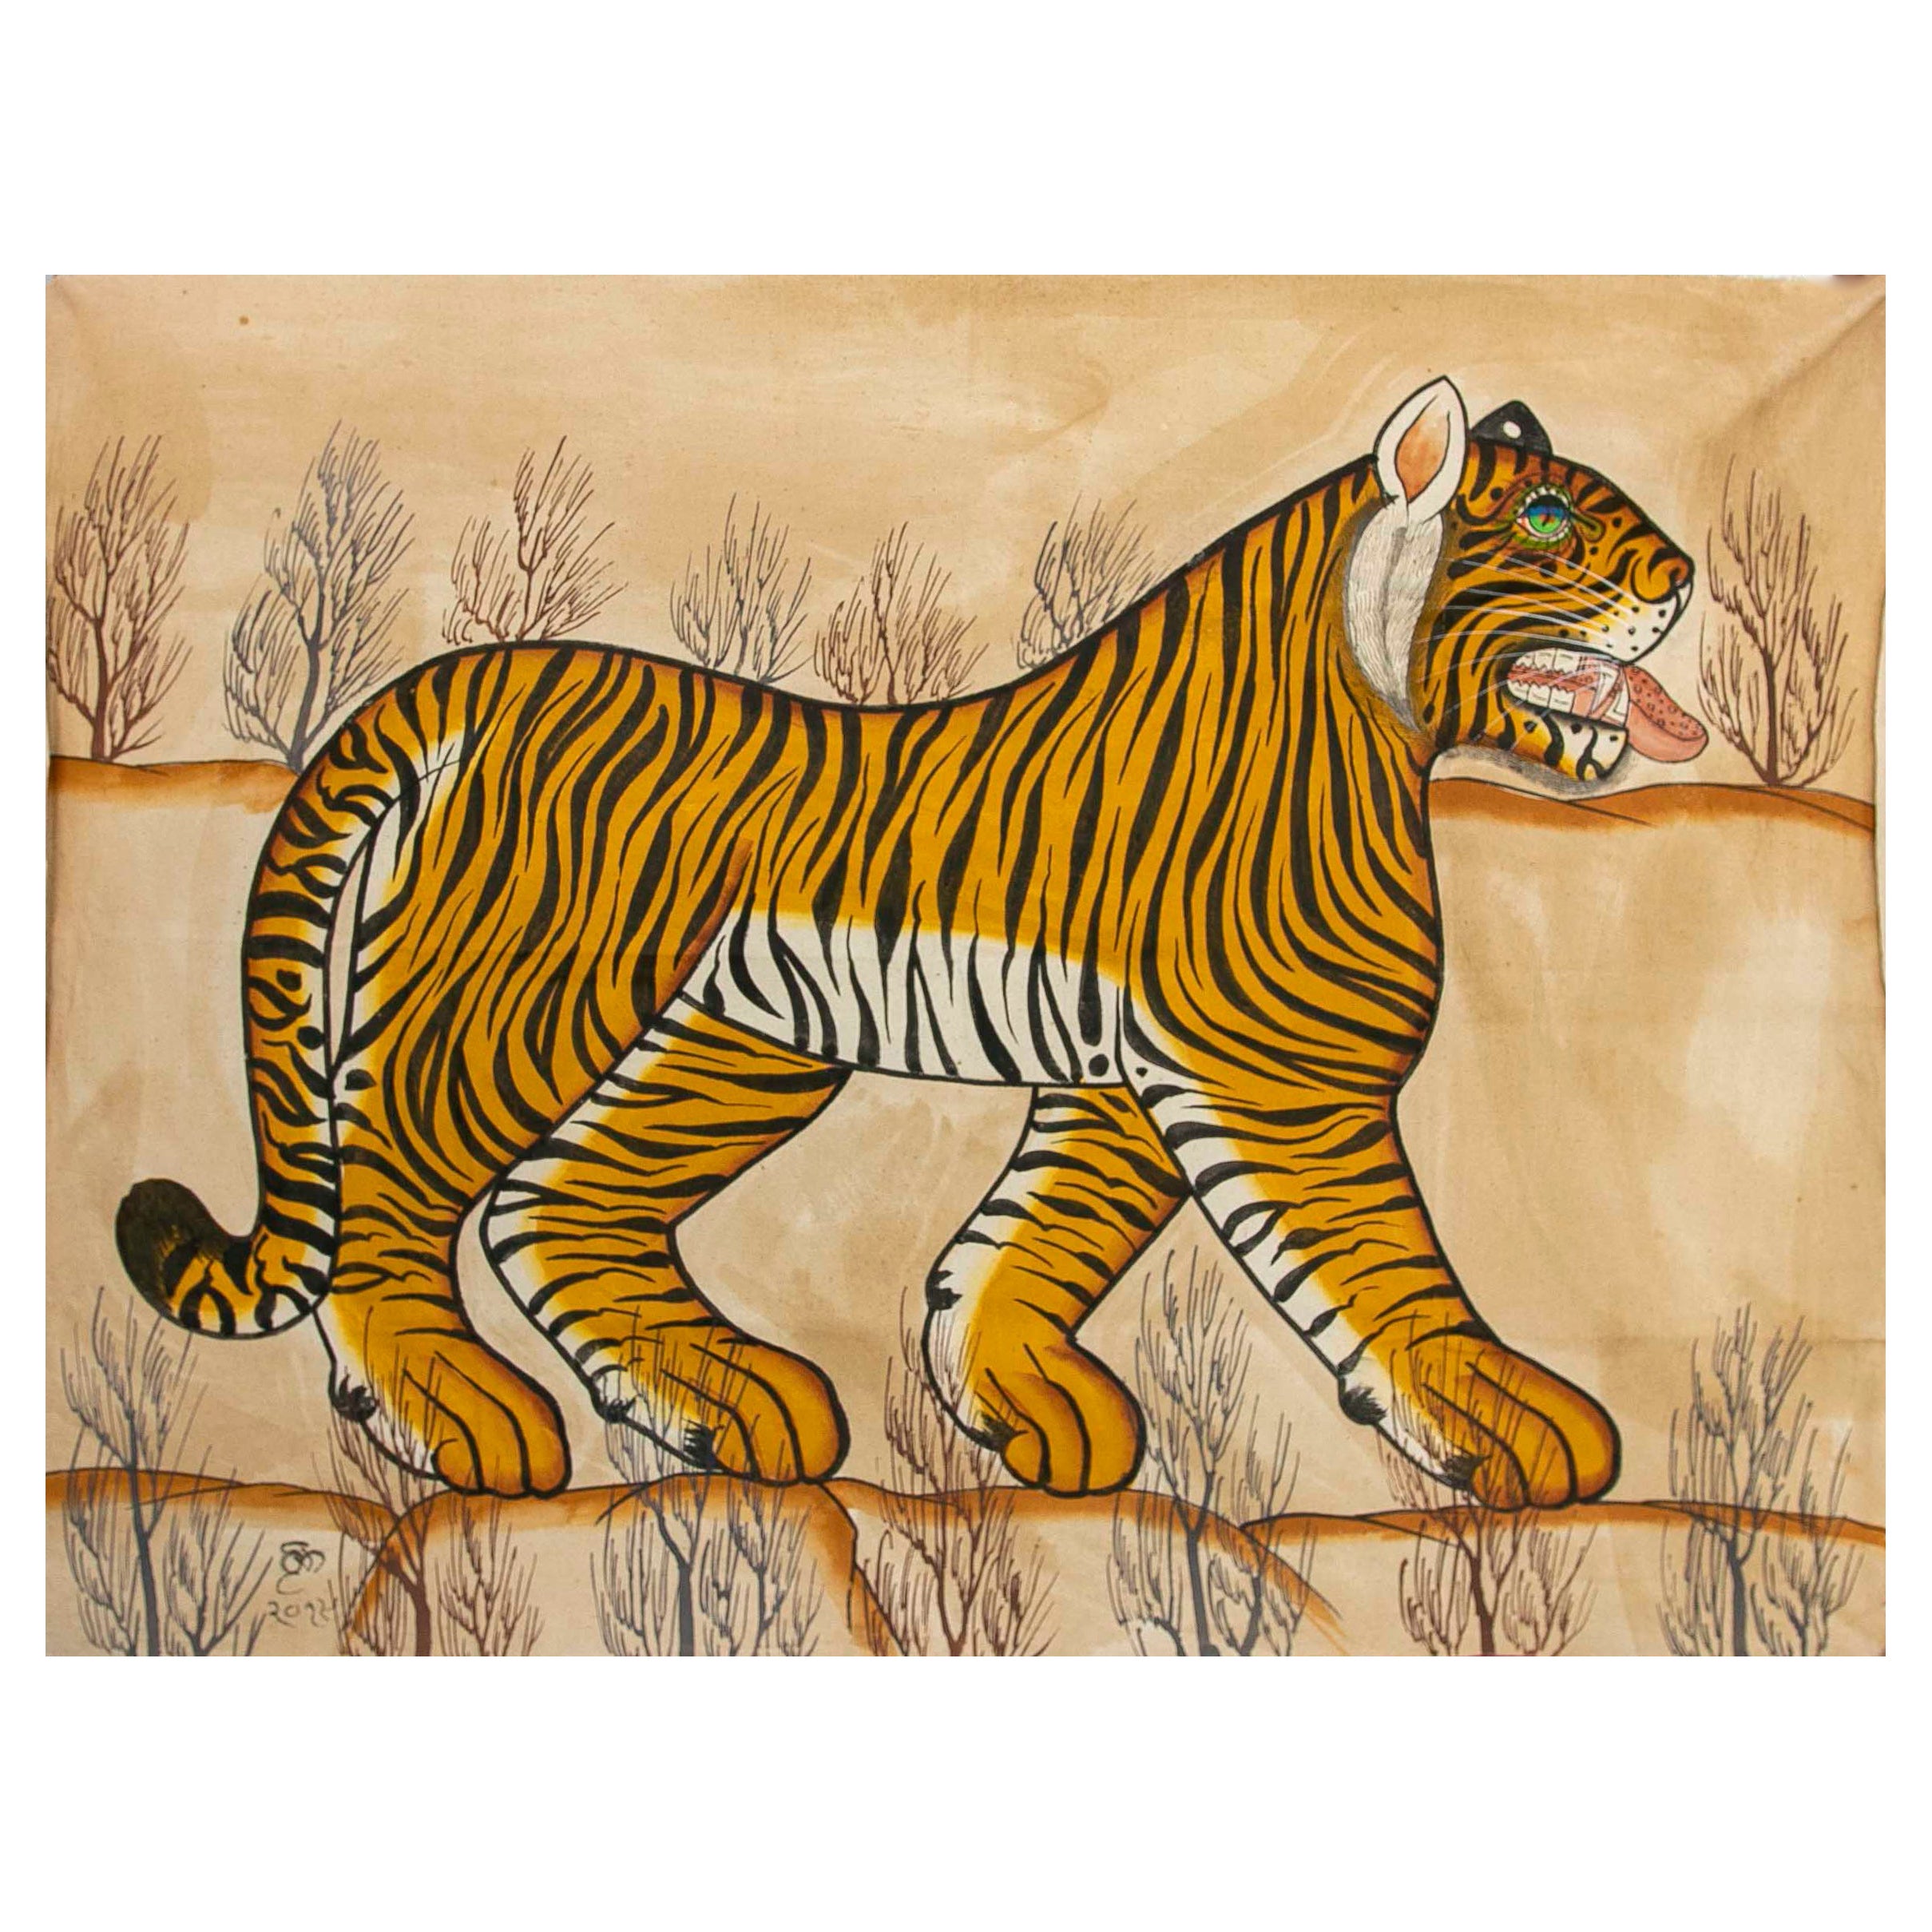 1970s Jaime Parlade Designer Hand Painting "Tiger" Oil on Canvas